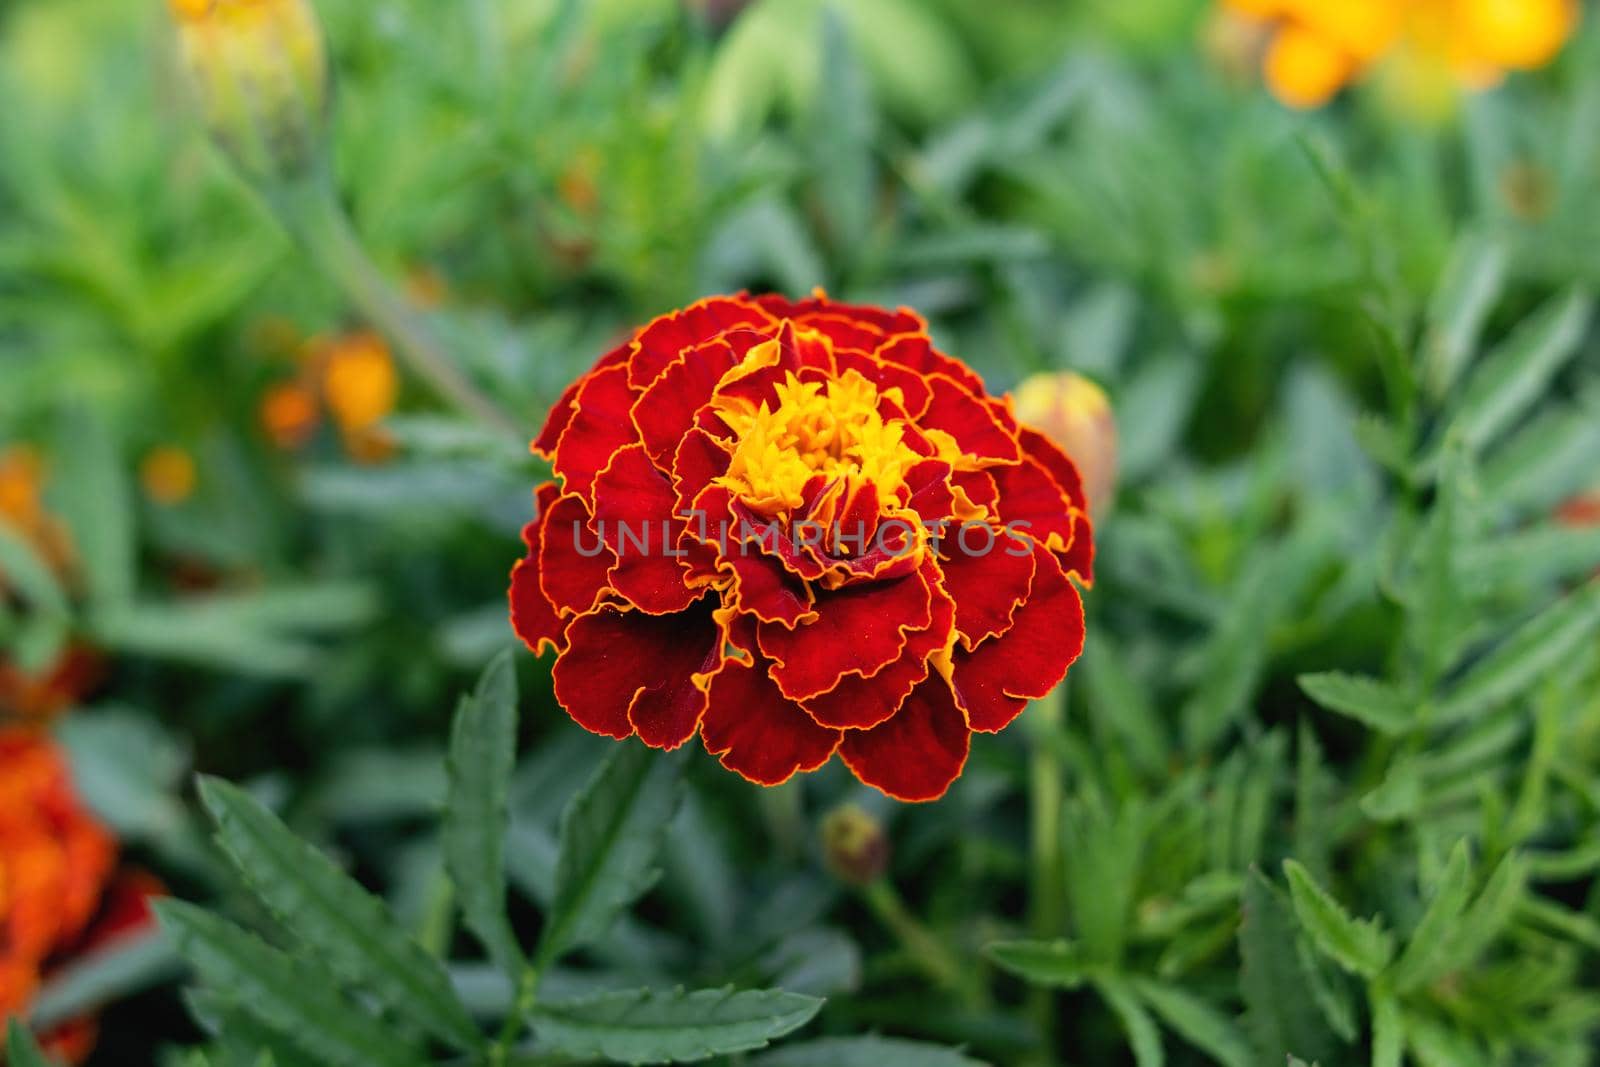 Red marigold flowers among green leaves close up